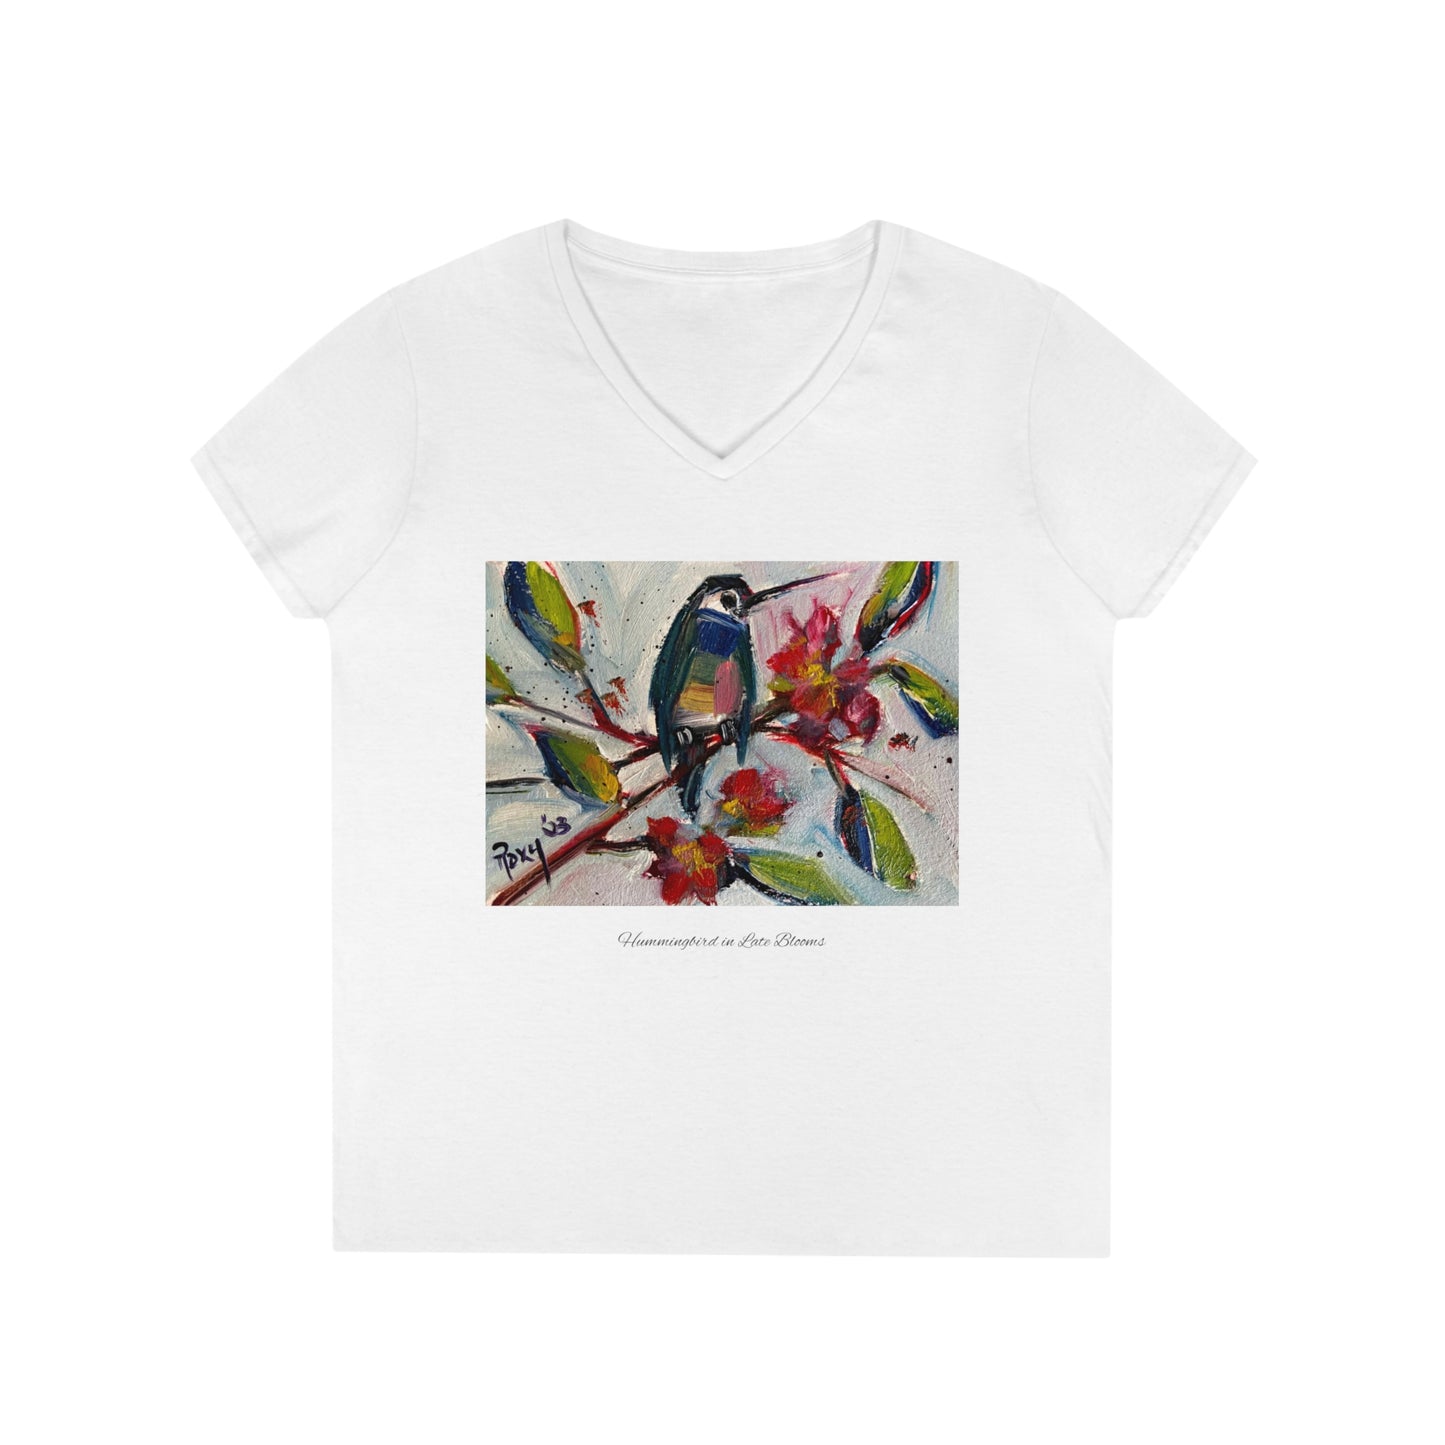 Hummingbird in Late Blooms Ladies' V-Neck T-Shirt